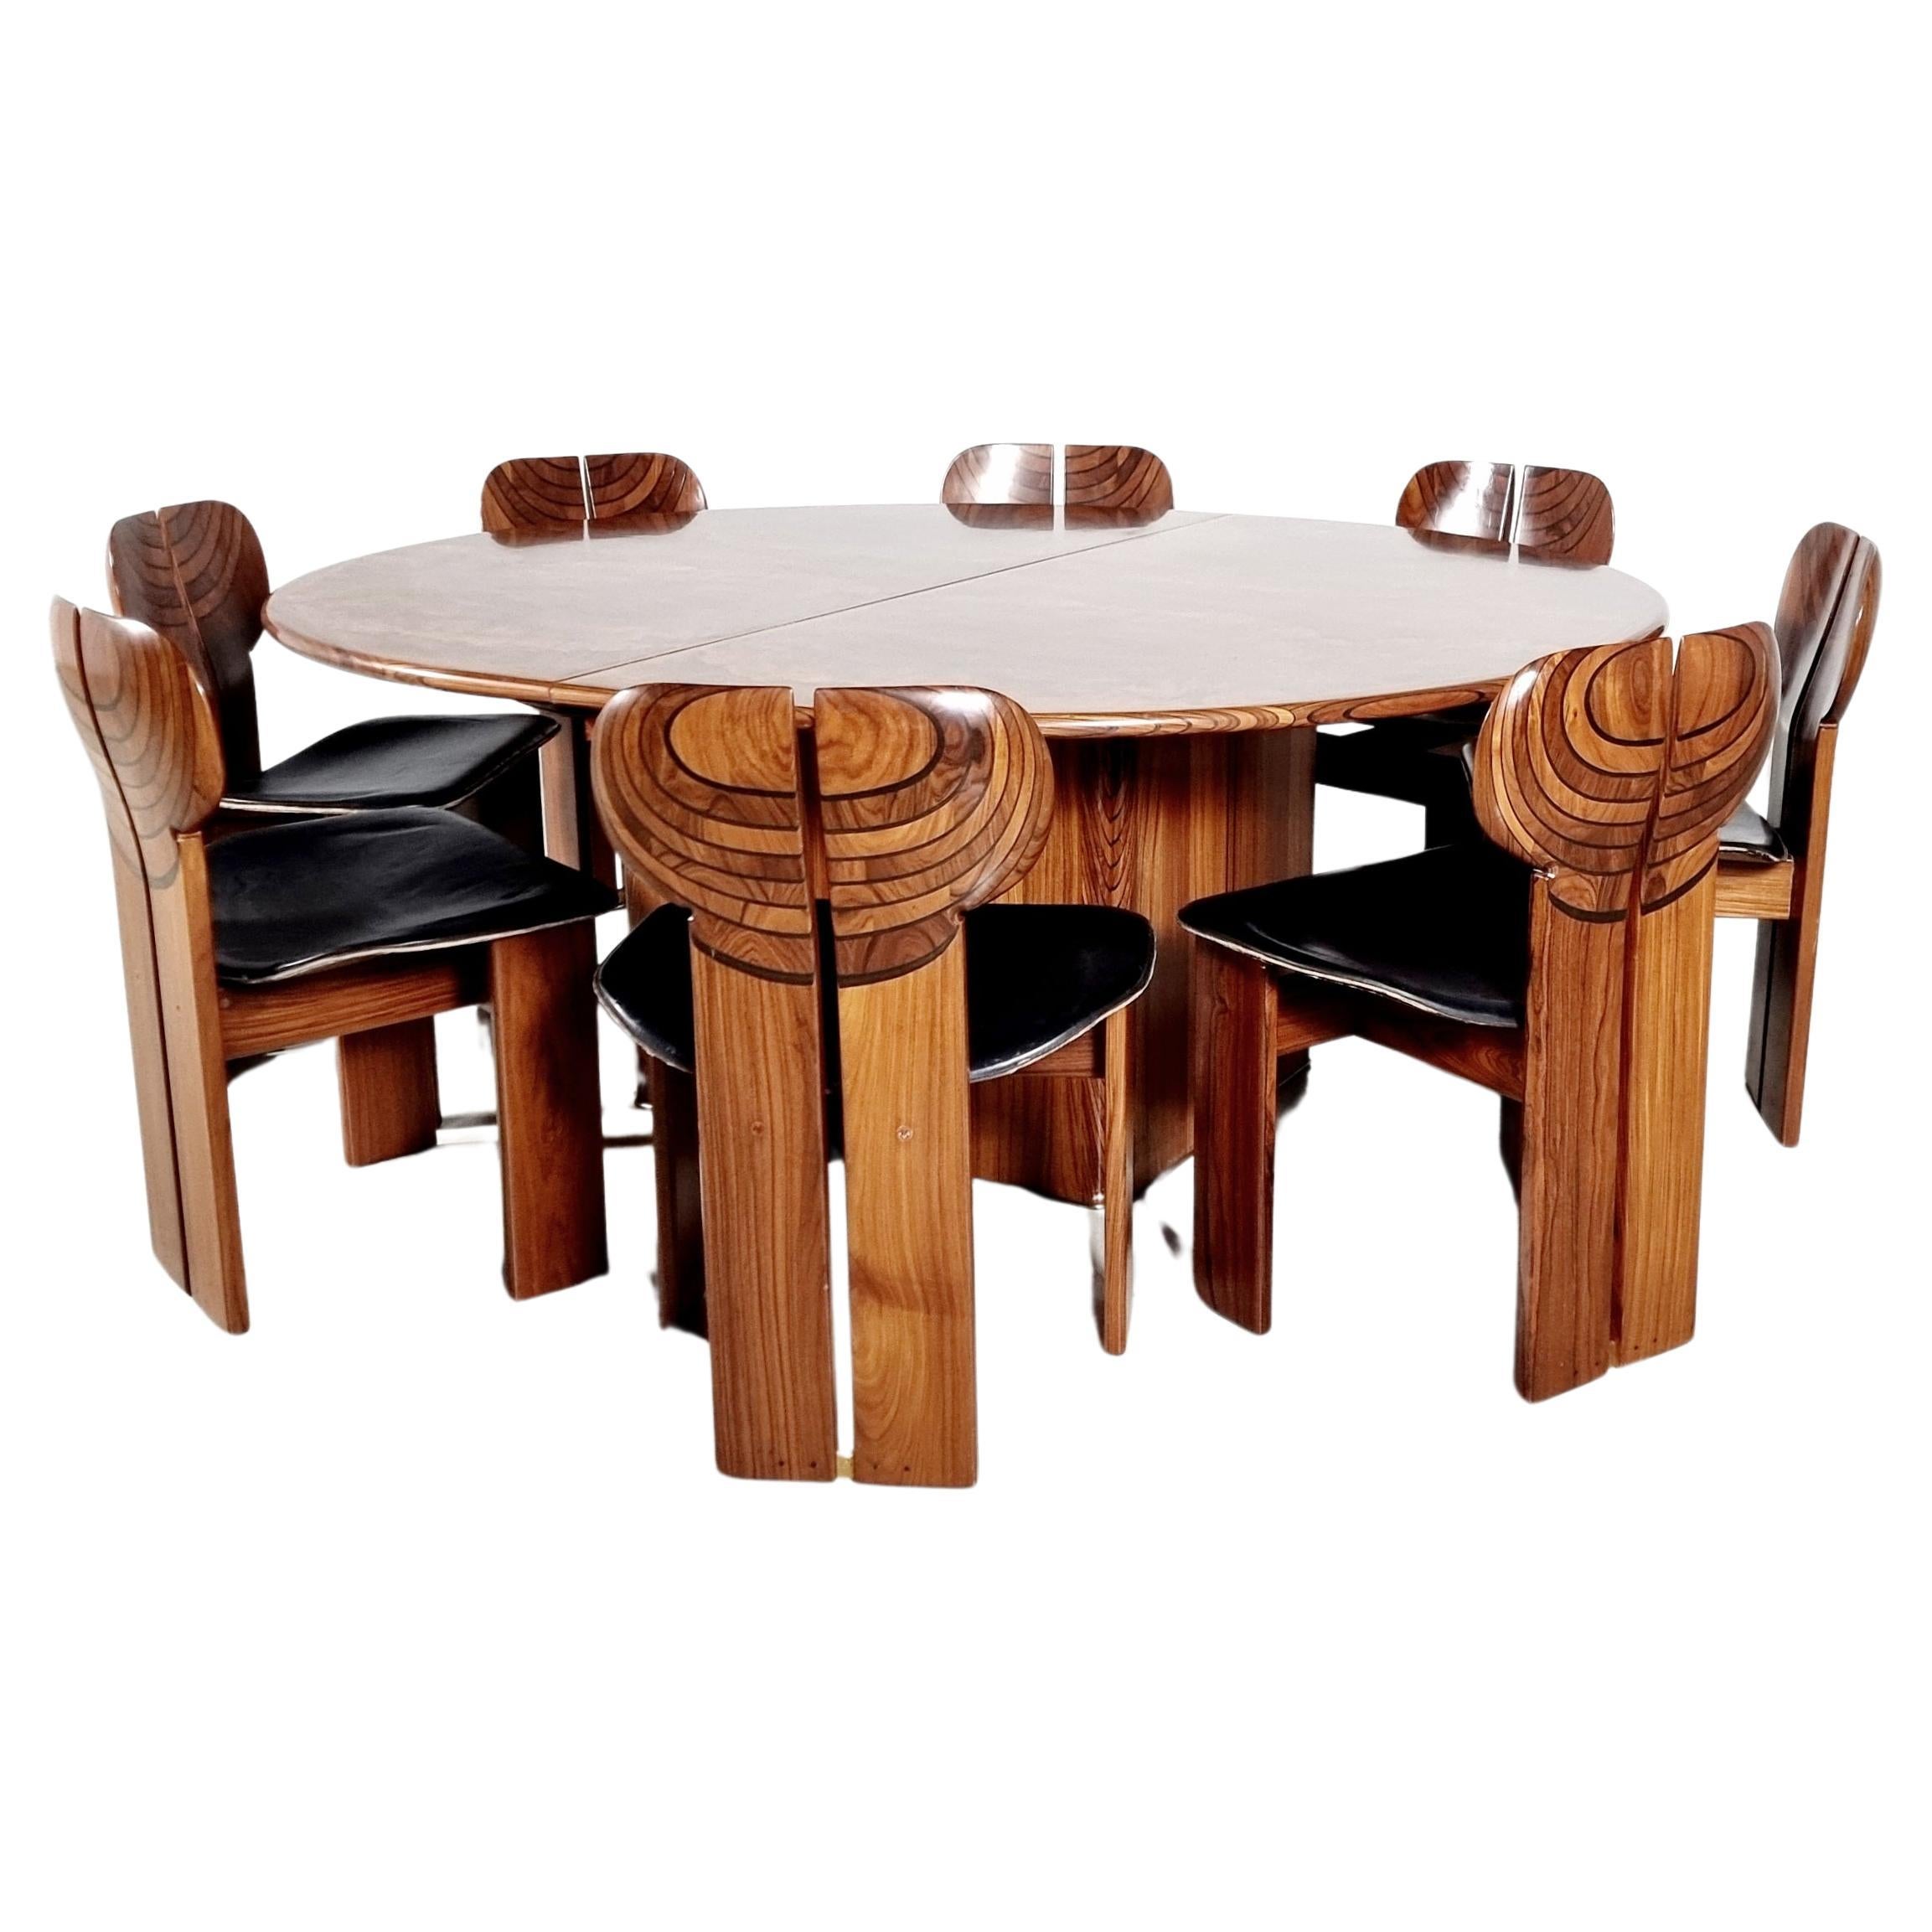 Artona 'Africa' dining set by Tobia Scarpa in walnut wood and leather, Maxalto For Sale